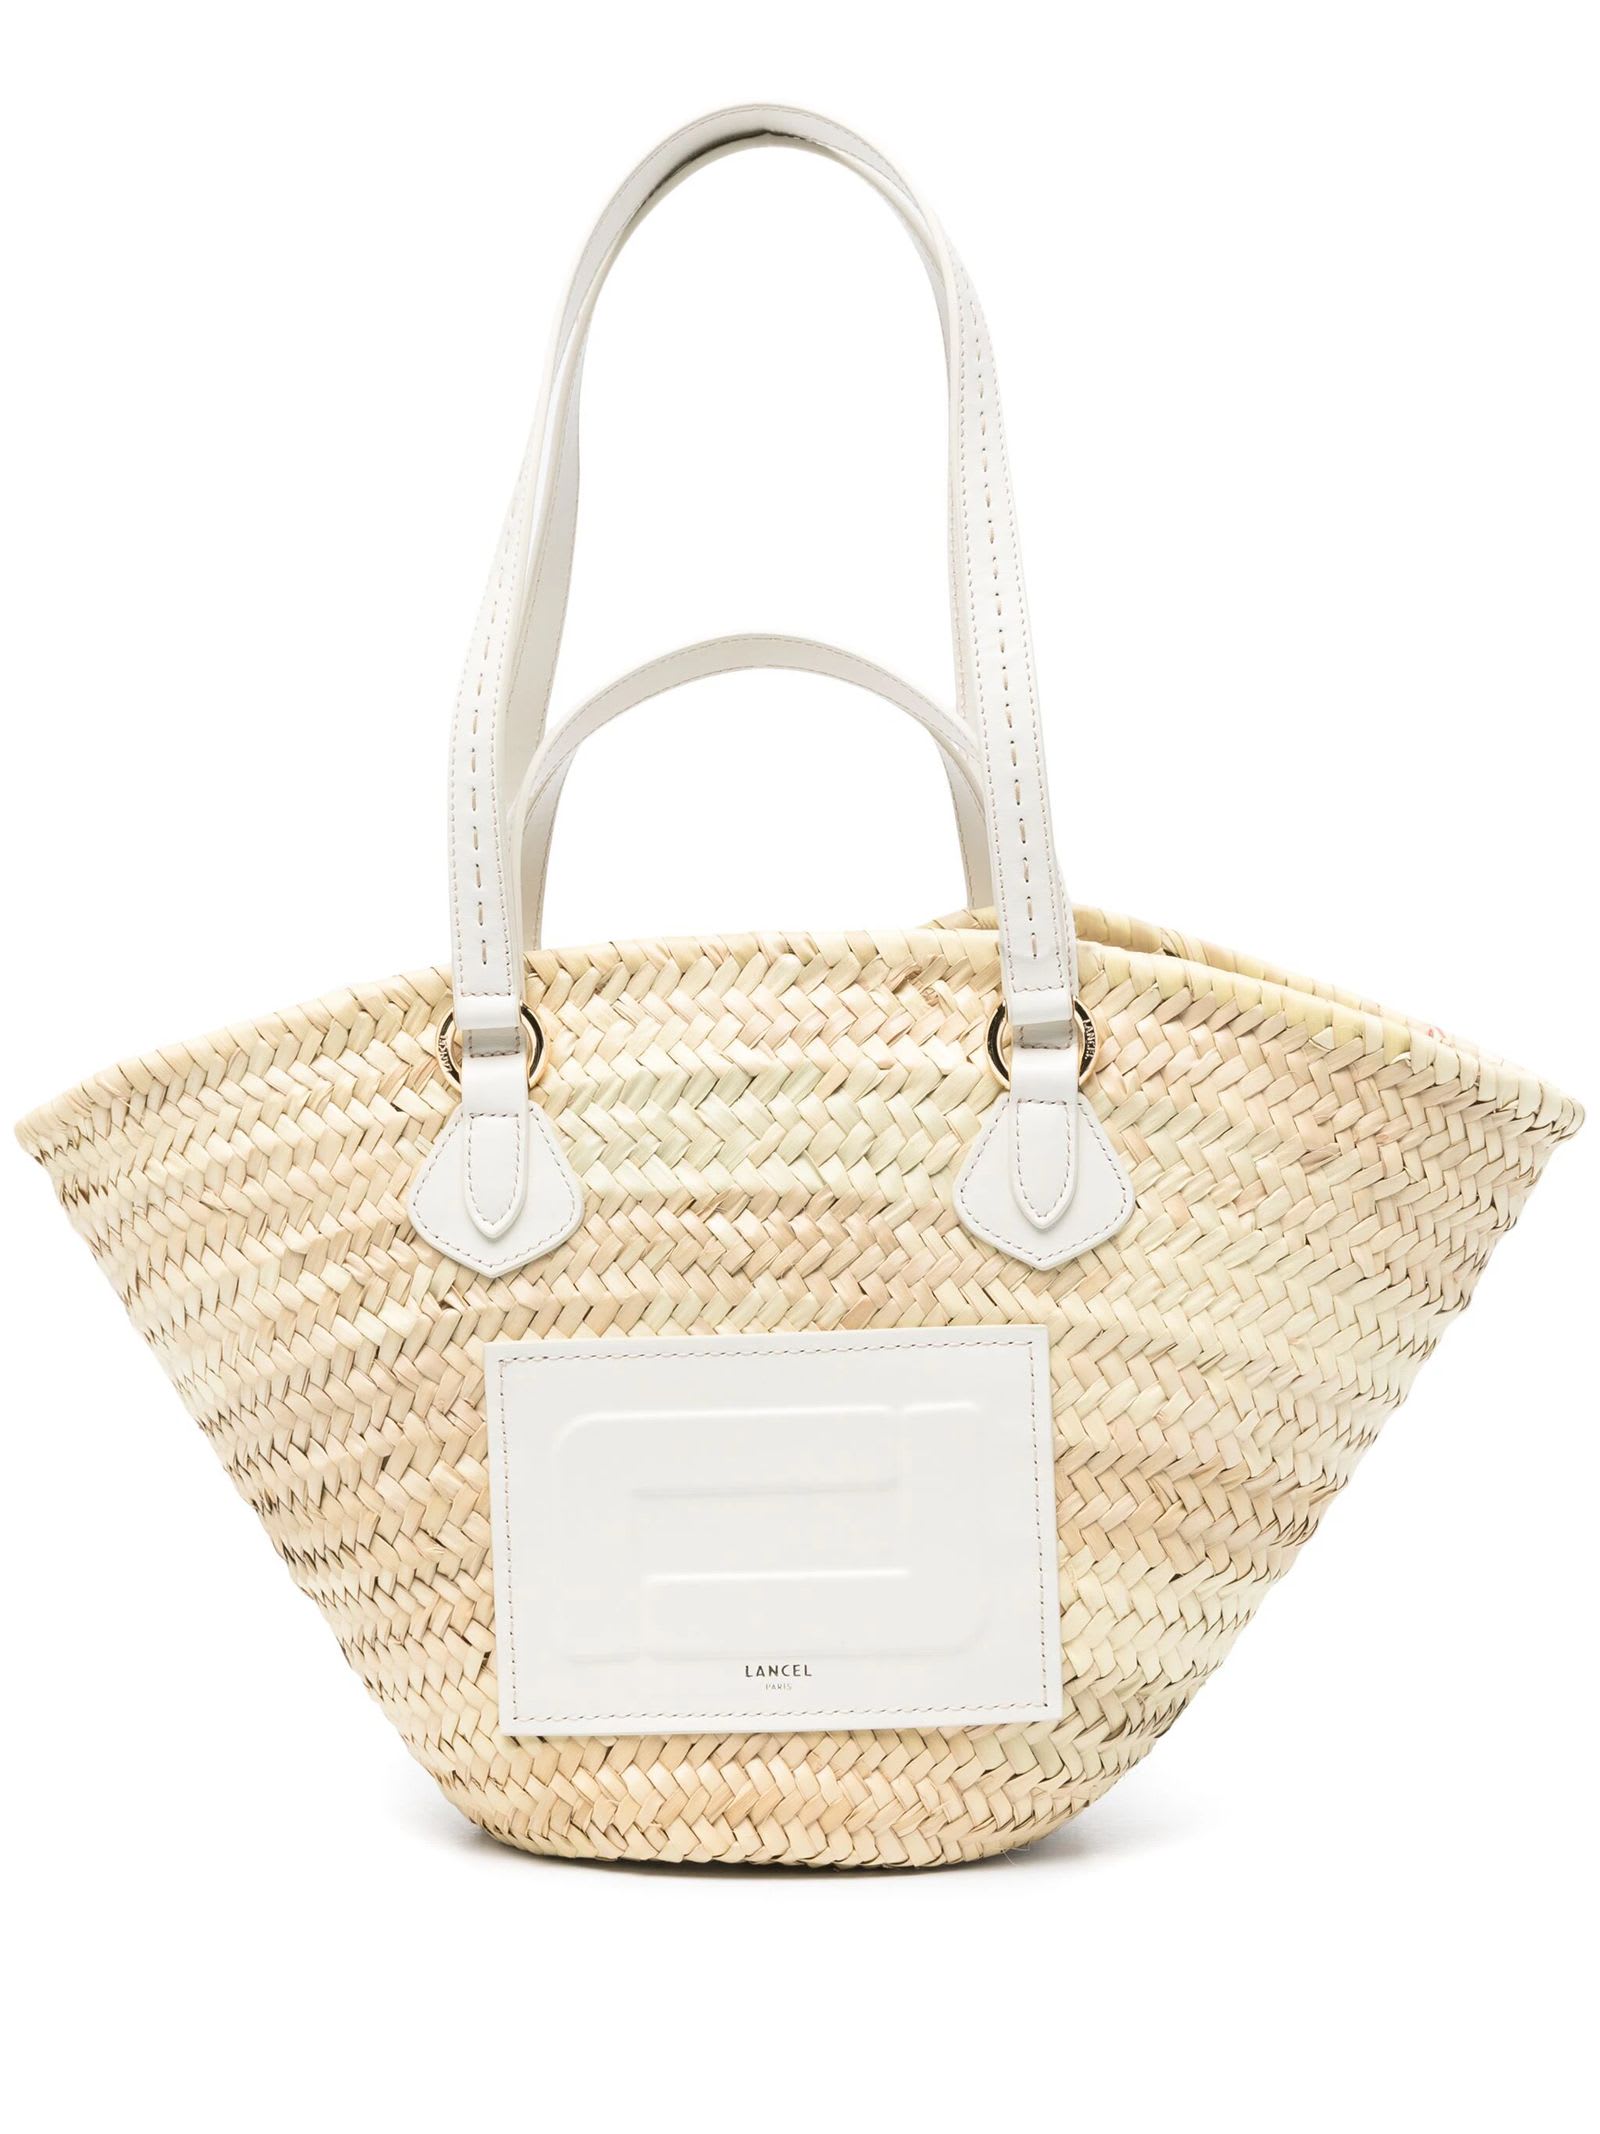 Lancel Light Beige And White Straw Beach Bag In Natural